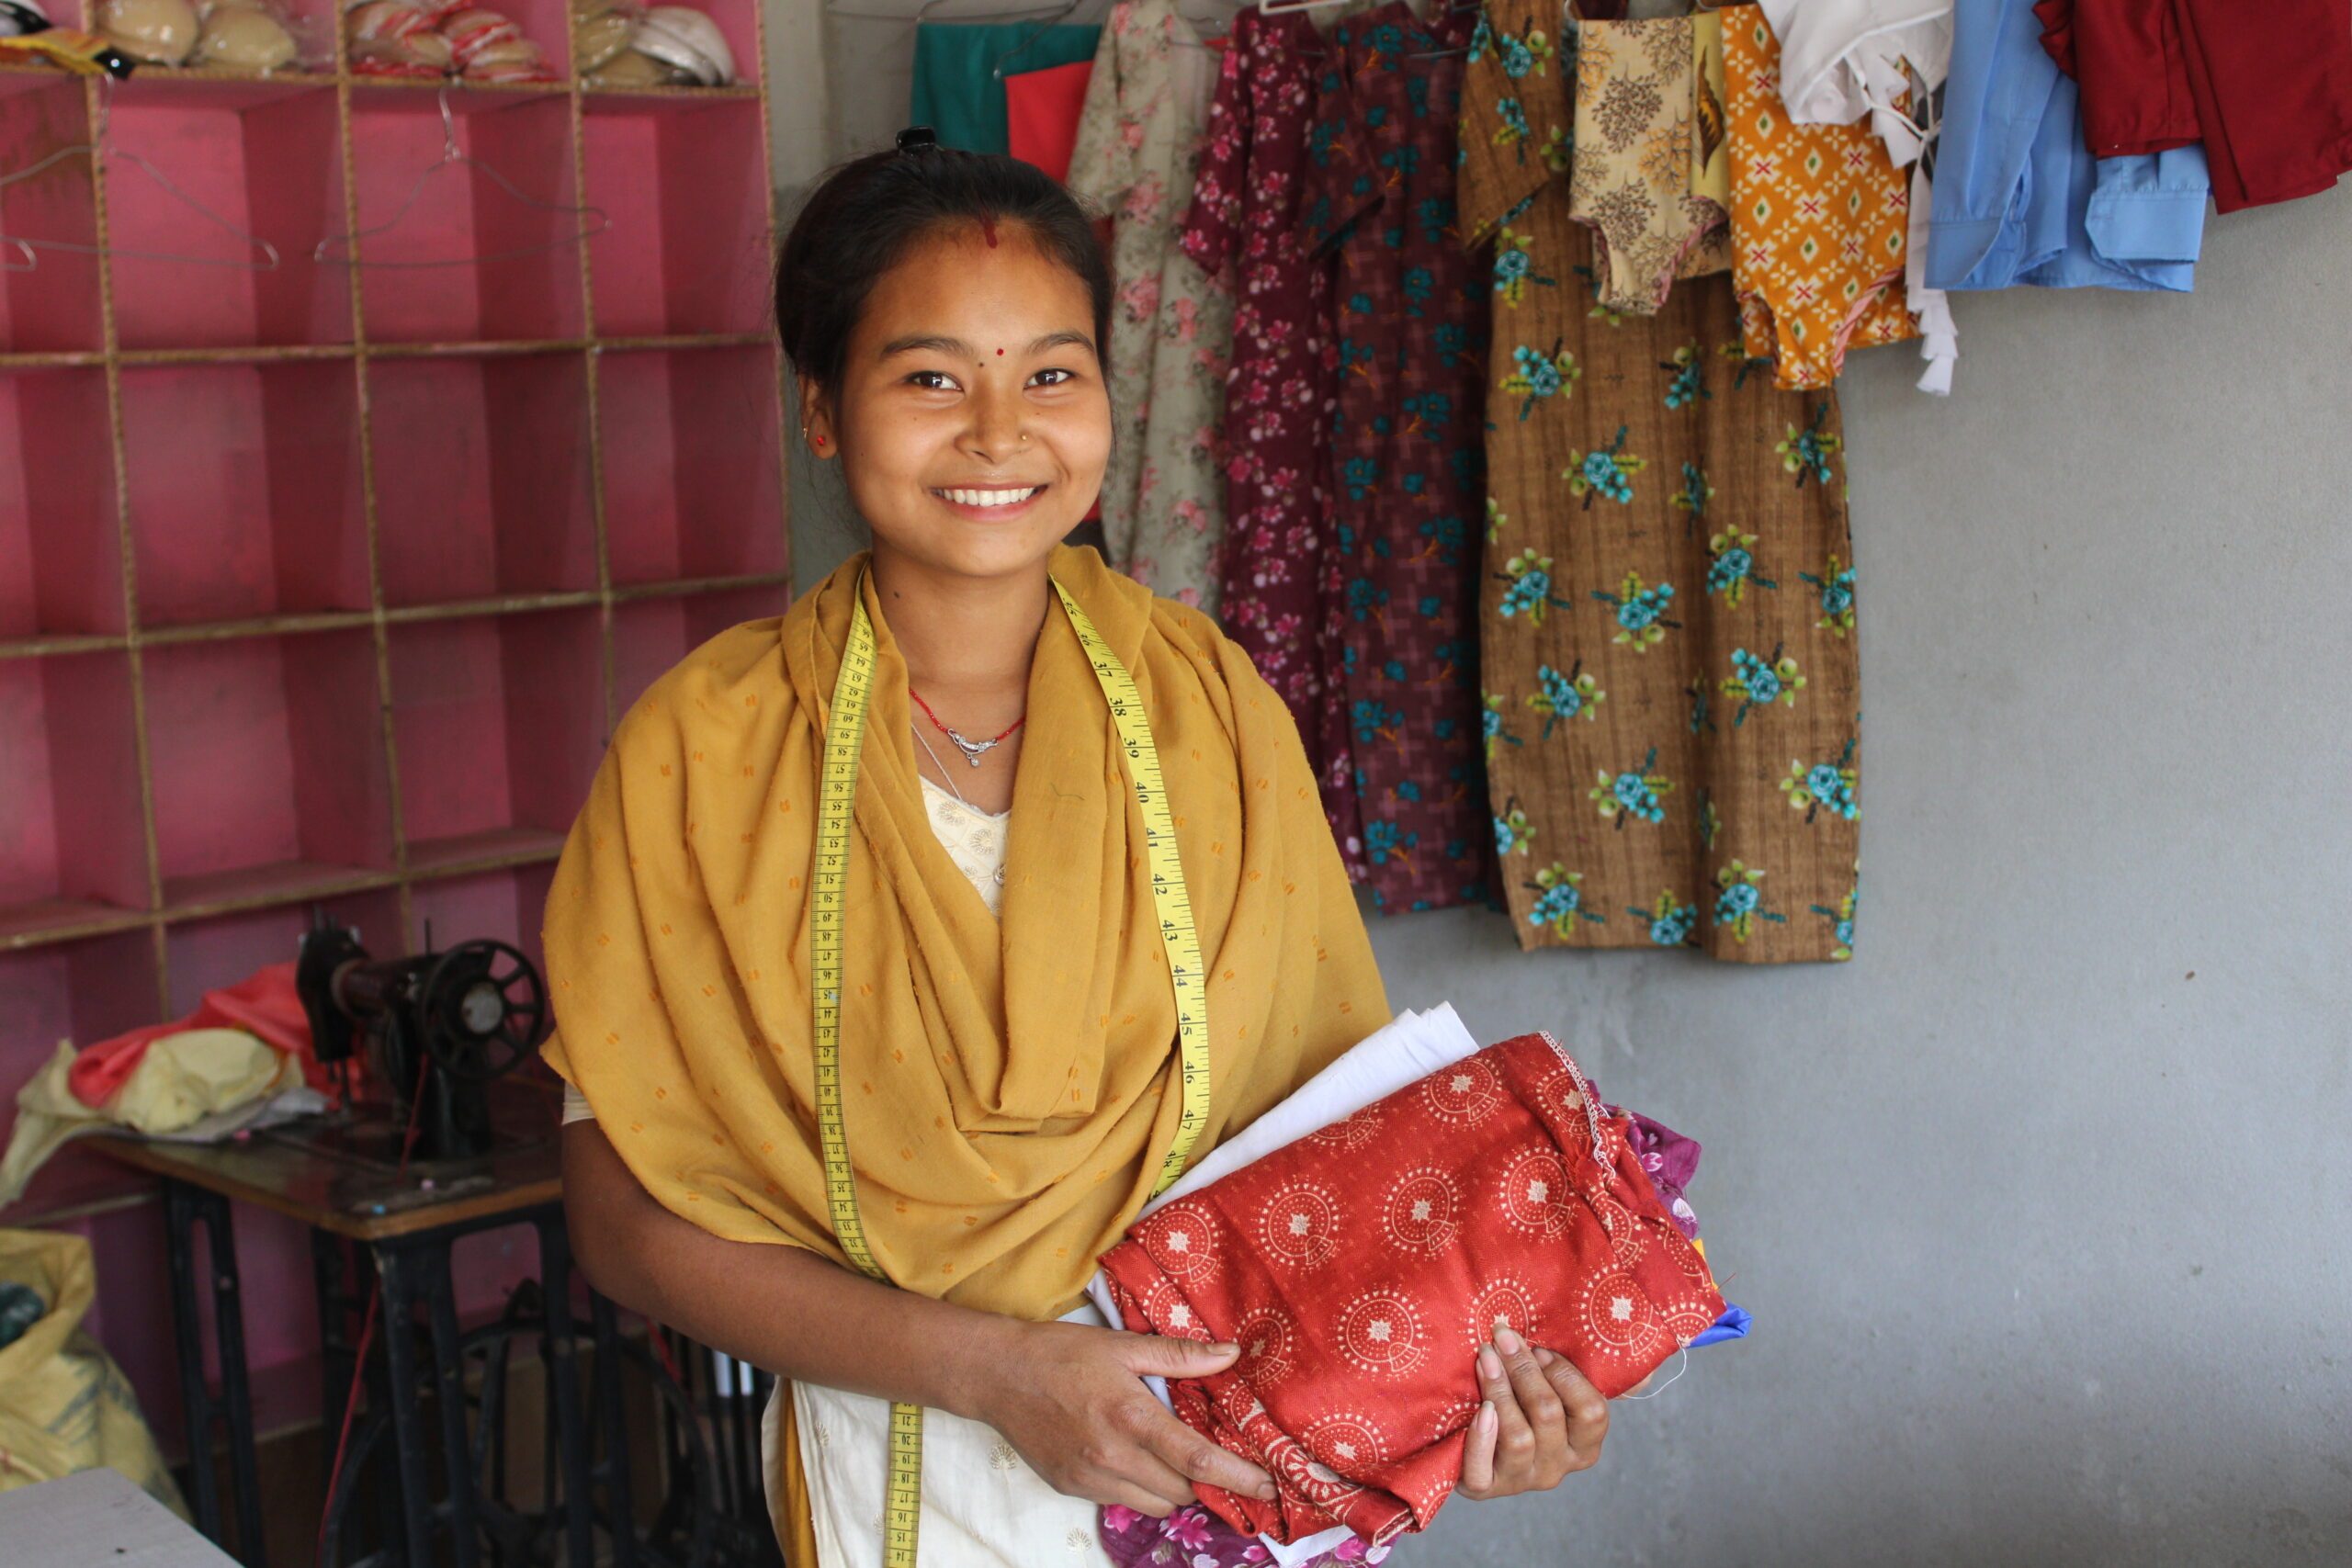 In her tailoring shop, Aarati delicately holds a handful of garments, inspecting them with care.